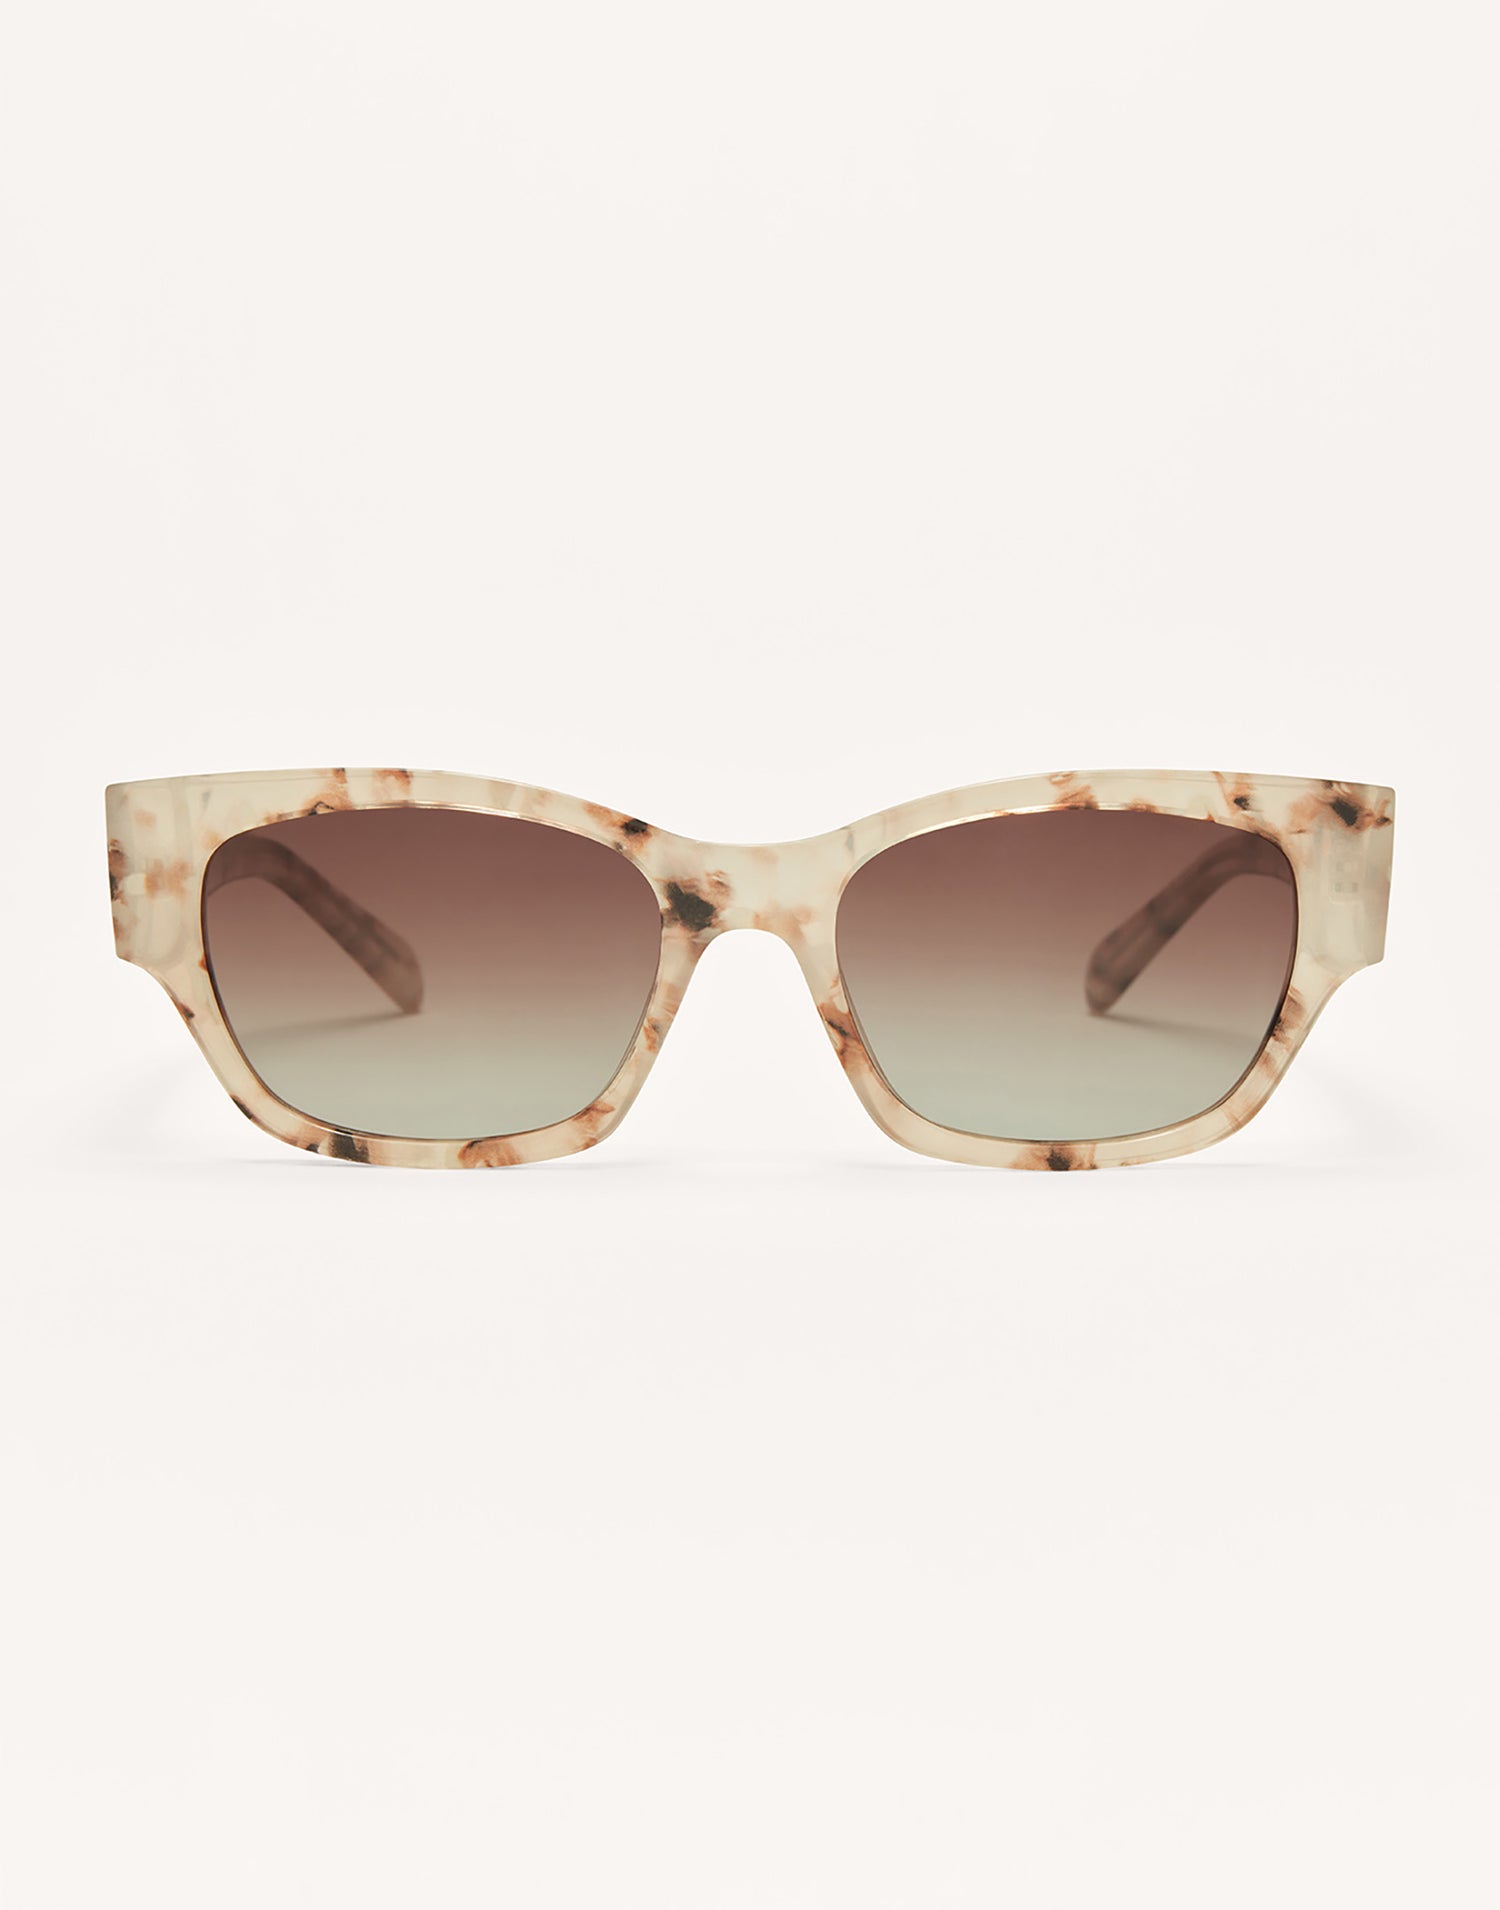 Roadtrip Sunglasses by Z Supply in Warm Sands - Front View